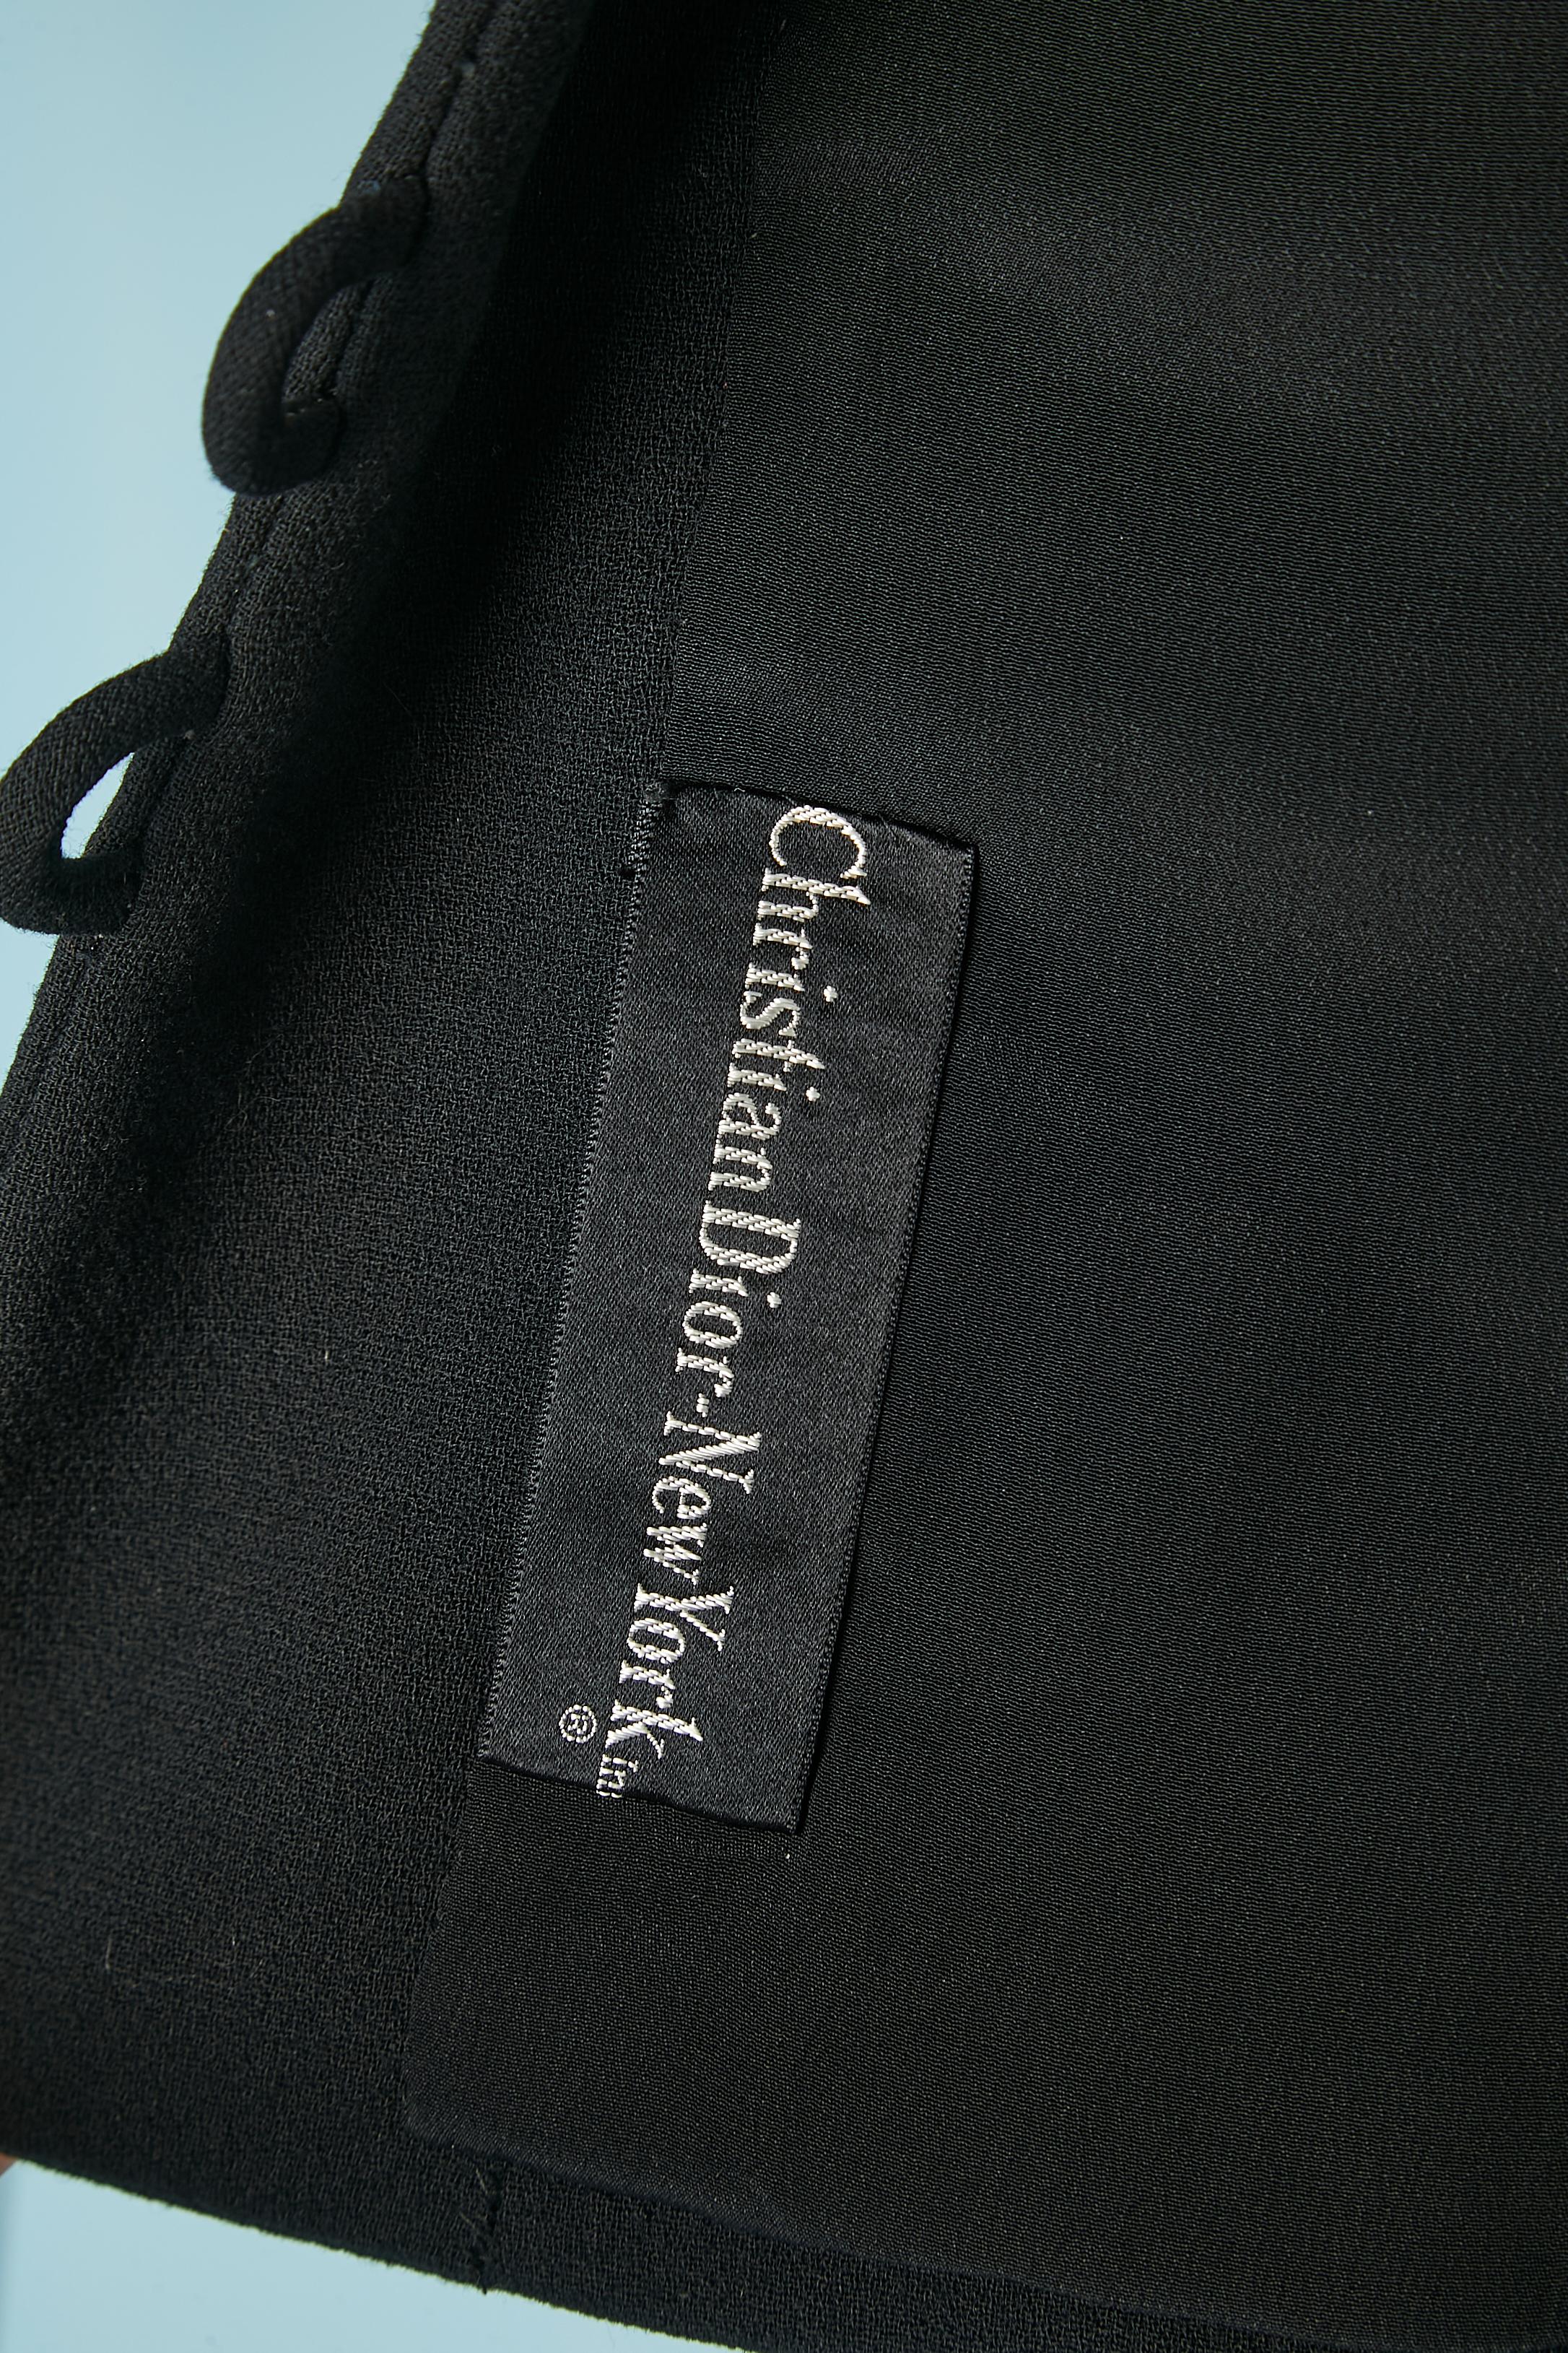 Black wool crêpe skit-suit with black buttons Christian Dior New-York Circa 1950 For Sale 4